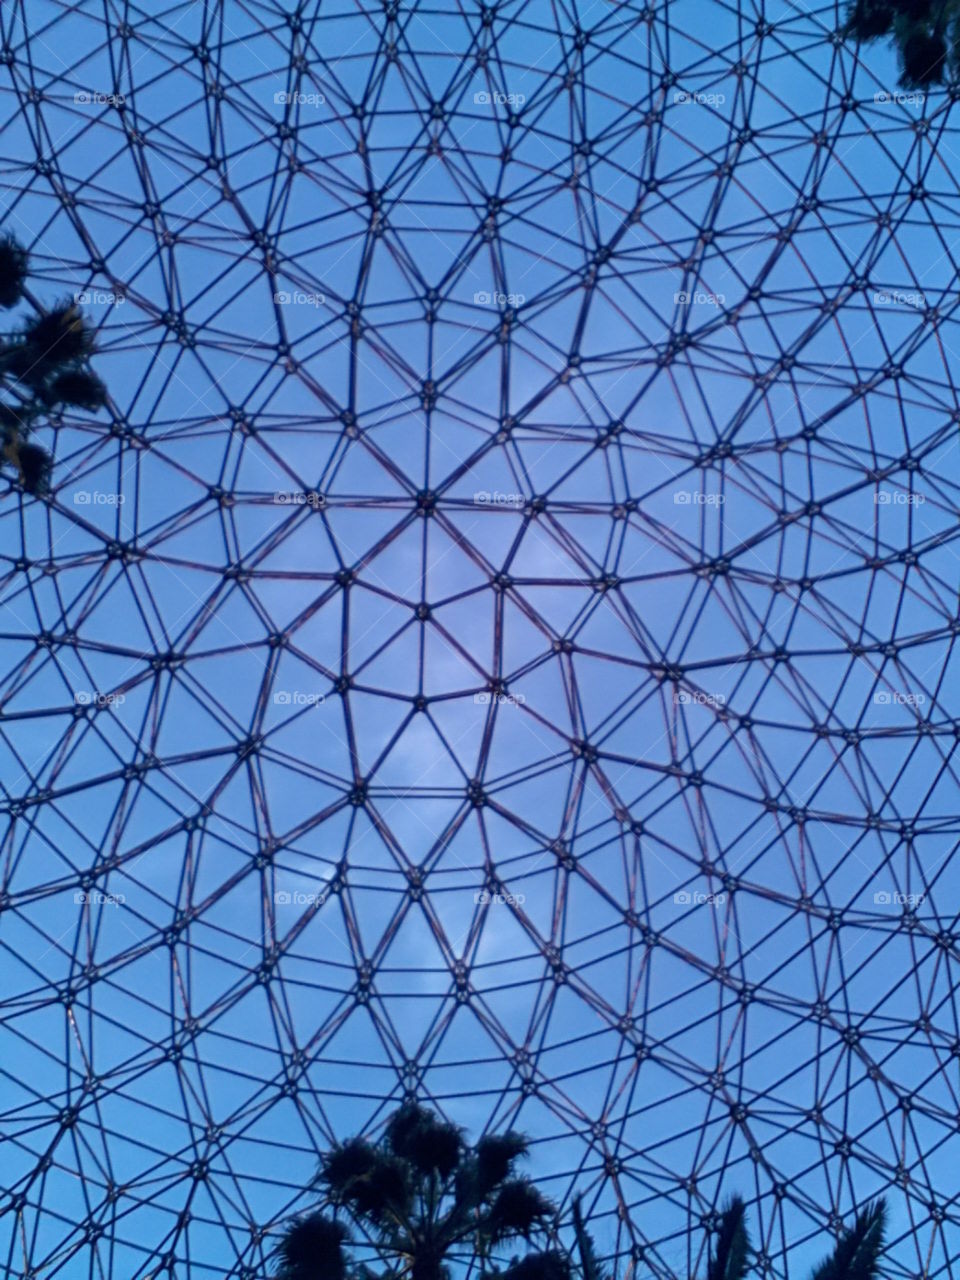 Pattern Above. just wandering around city walk. i looked up and saw this